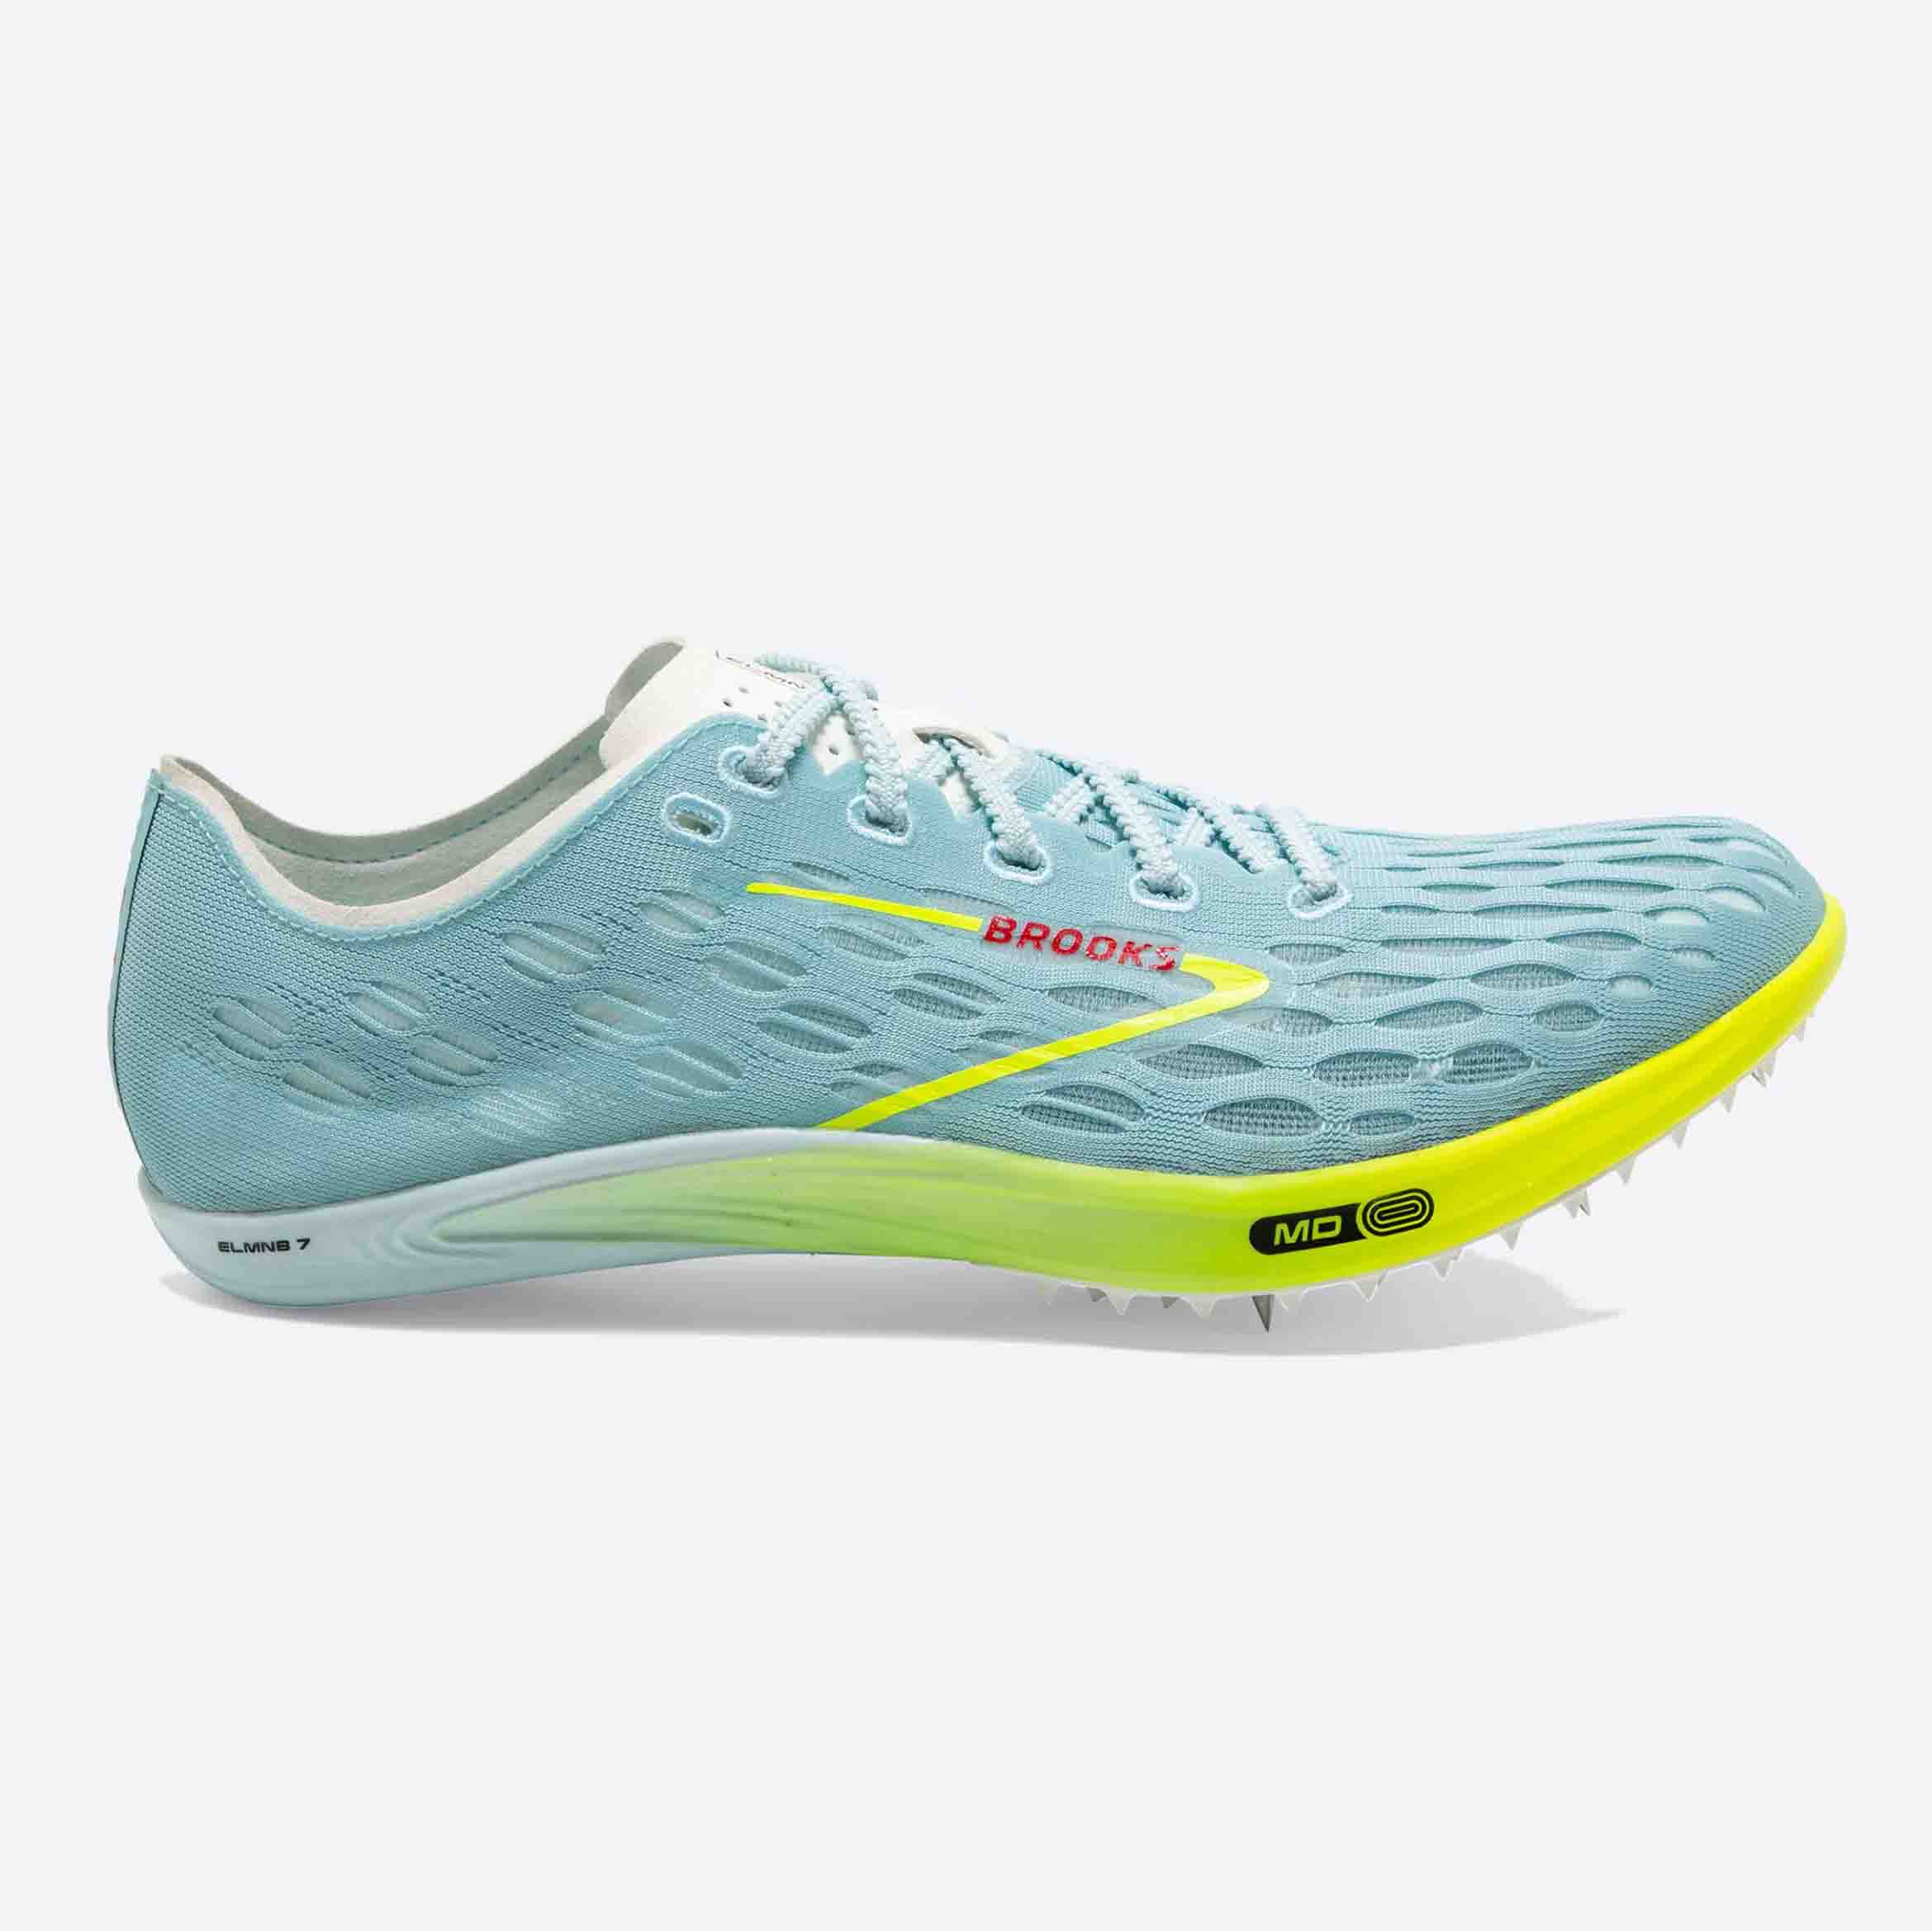 Brooks running shoes with track spikes in light blue